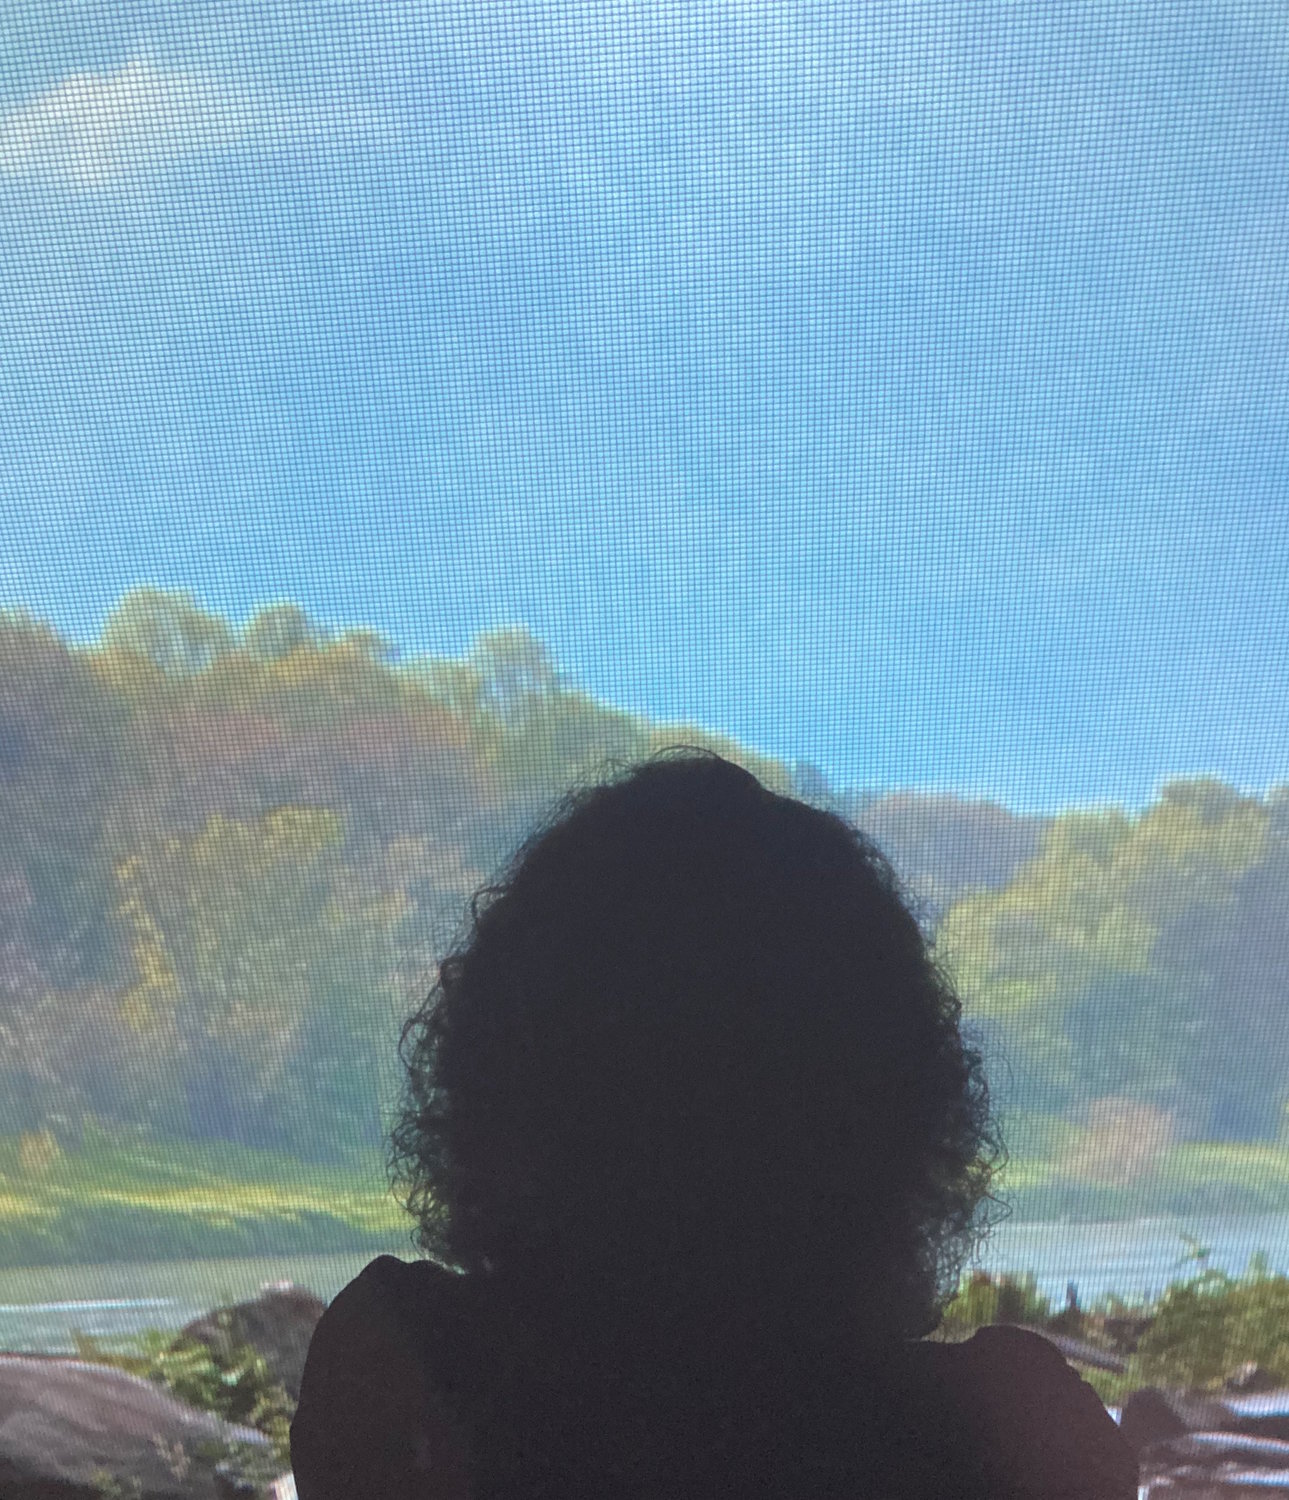 “You have to pick the places you don’t walk away from,” wrote Joan Didion in “A Book of Common Prayer.” For me, that place is the Upper Delaware River region. Here, the iconic river appears in the background against this selfie silhouette on the screen during my exhibit, “Impermanence,” last fall.